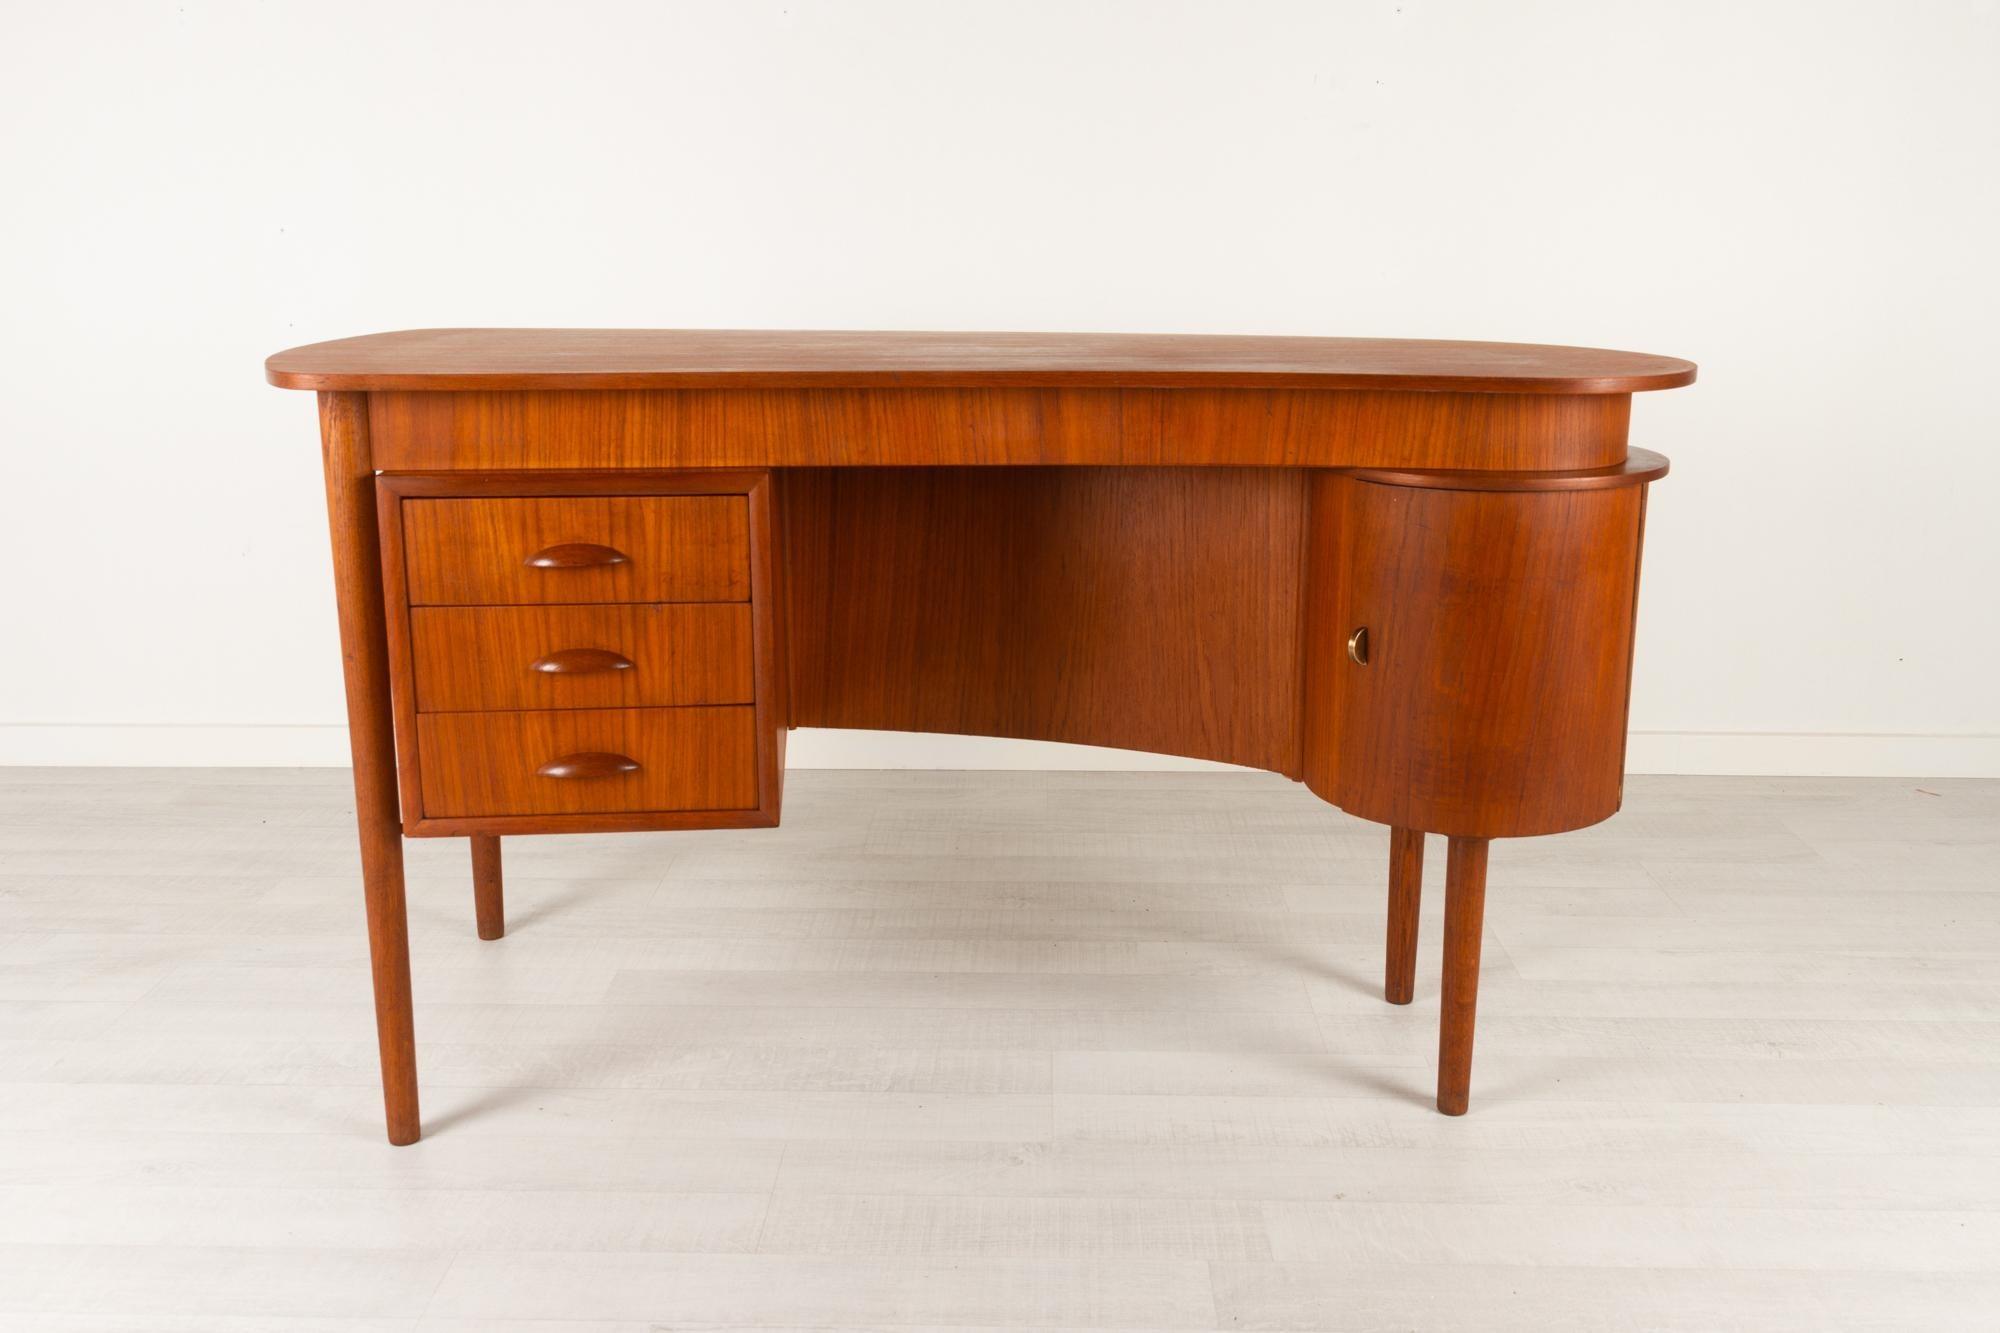 Vintage Danish teak kidney desk, 1950s
Danish Mid-Century Modern freestanding organically shaped writing desk. Kidney shaped table top in teak veneer. Drawer section with three drawers with sculpted pulls in solid teak. Round corner cabinet with